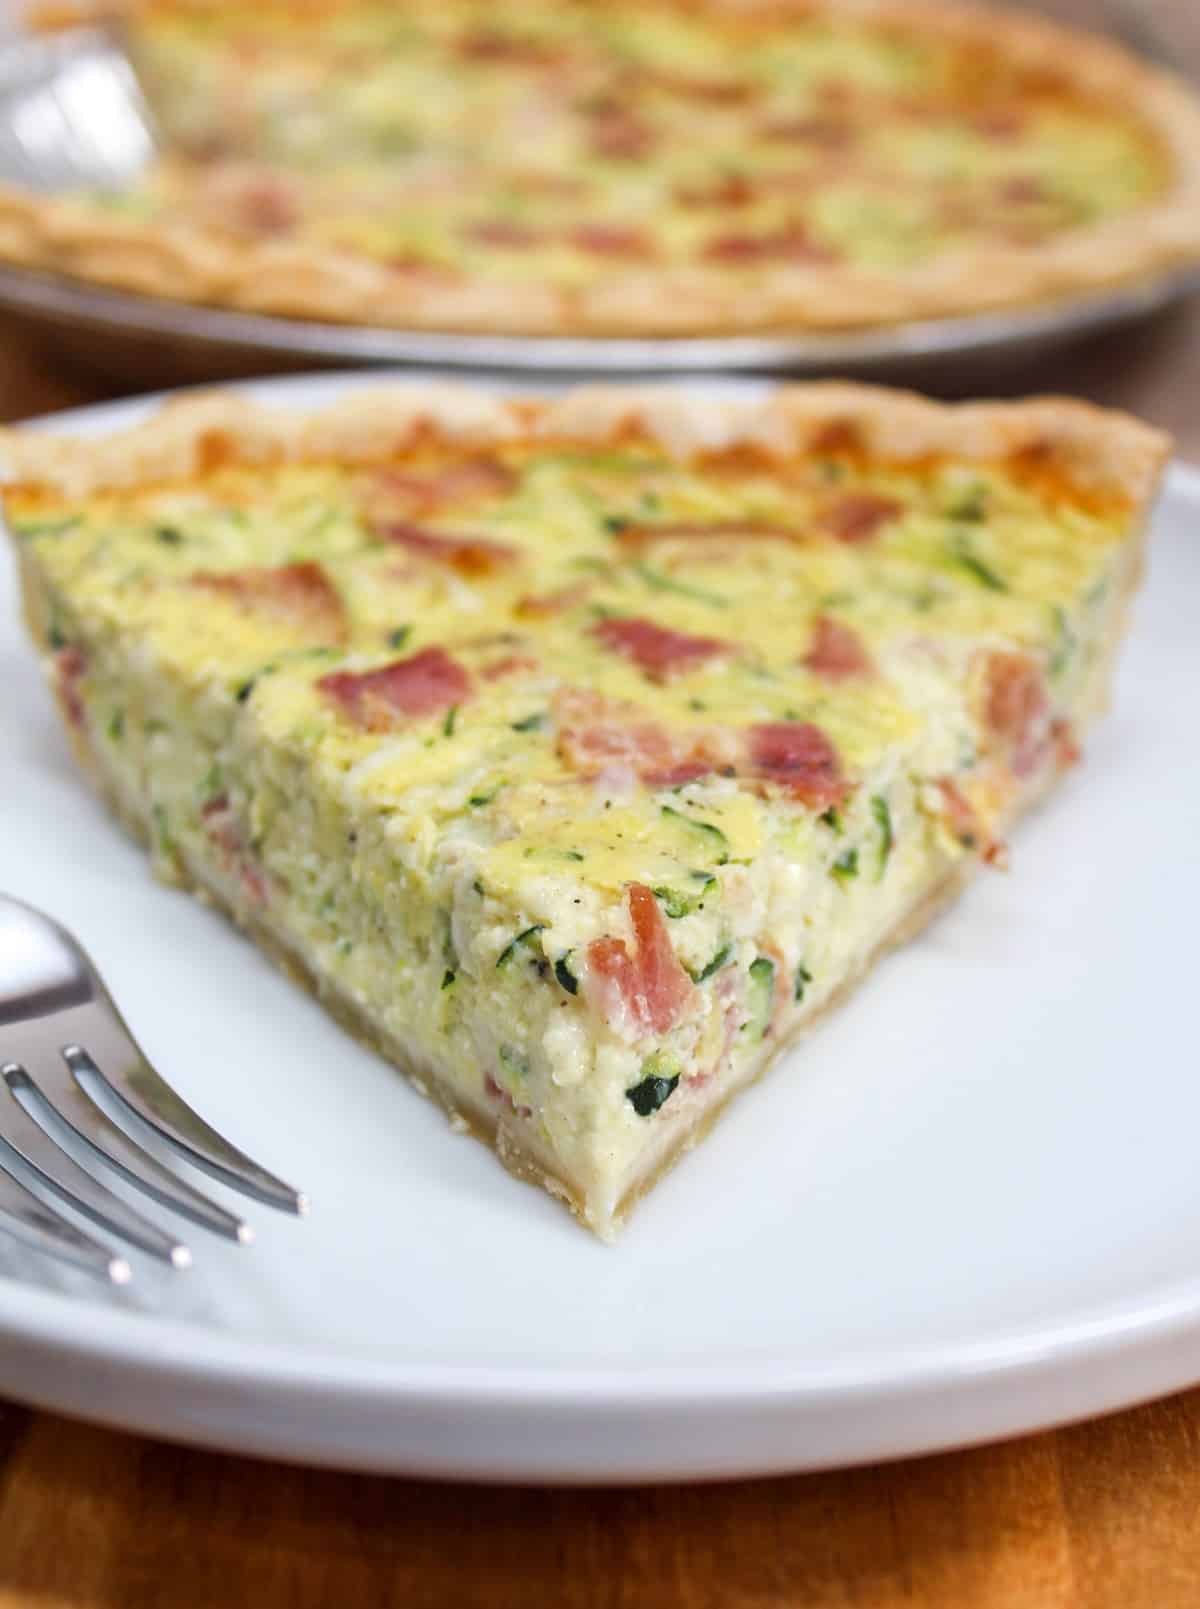 Sliced quiche on a white plate with a fork on the side.